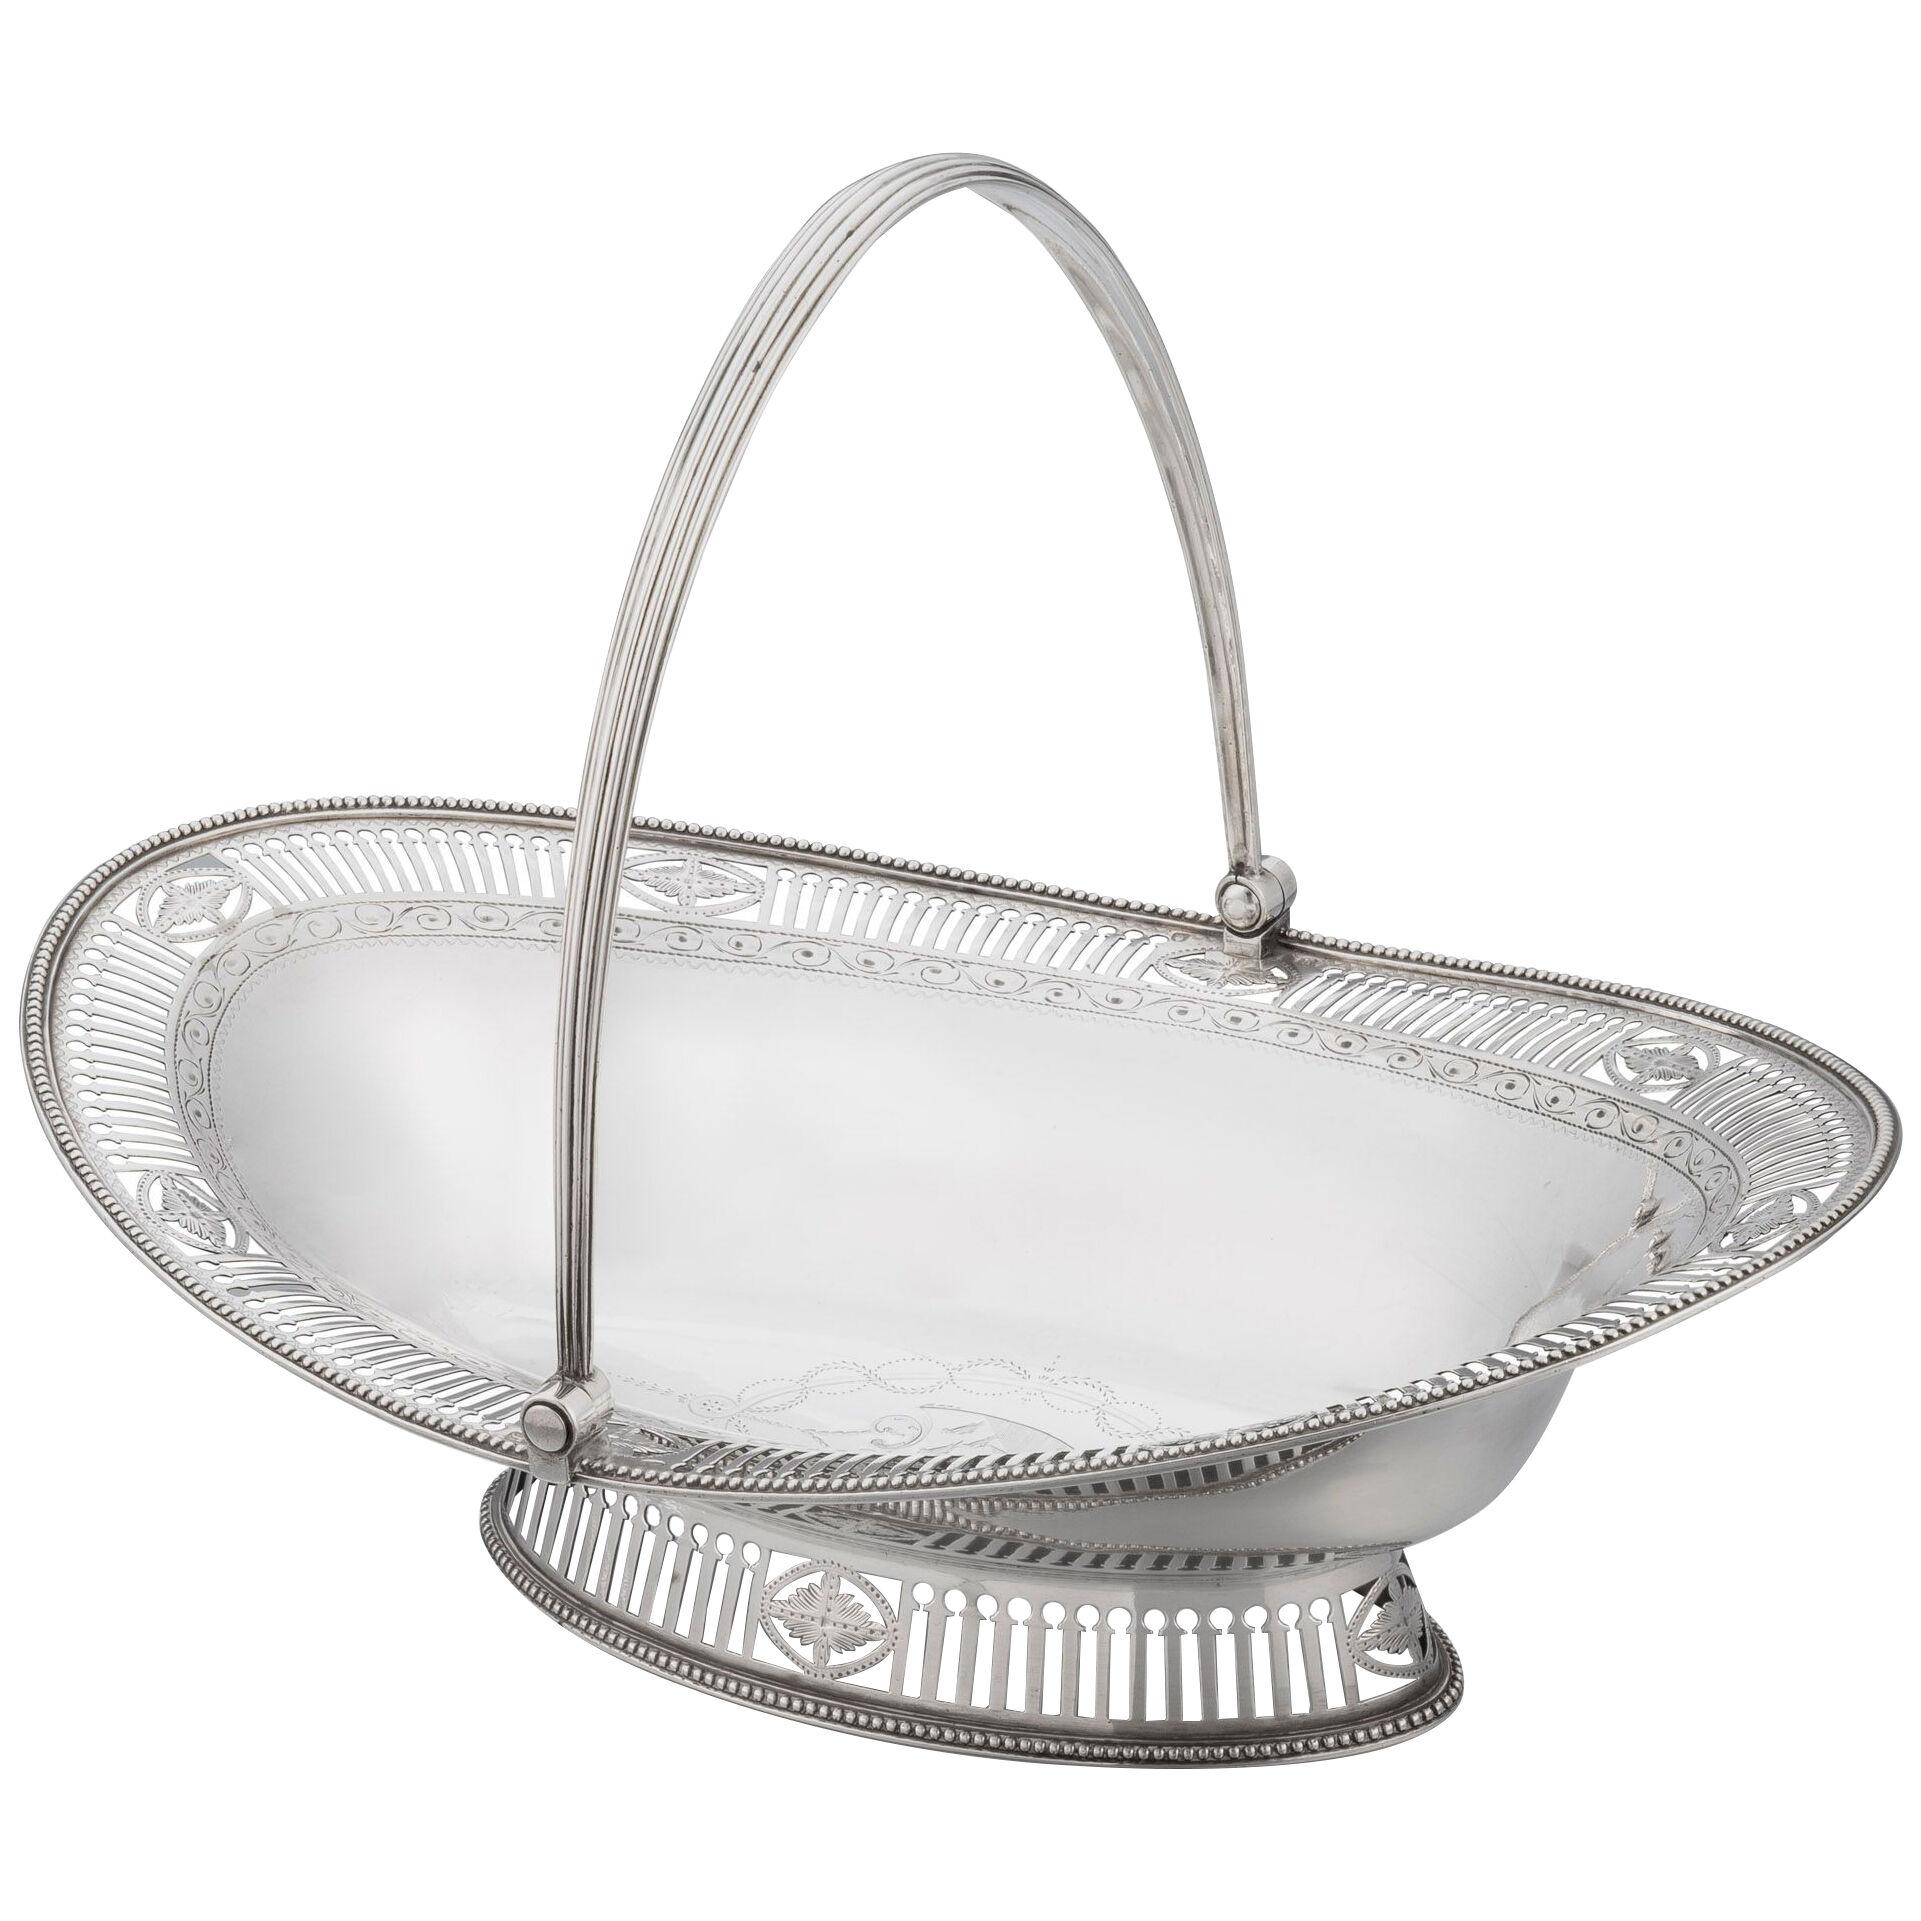 An Antique George III Sterling Silver Basket